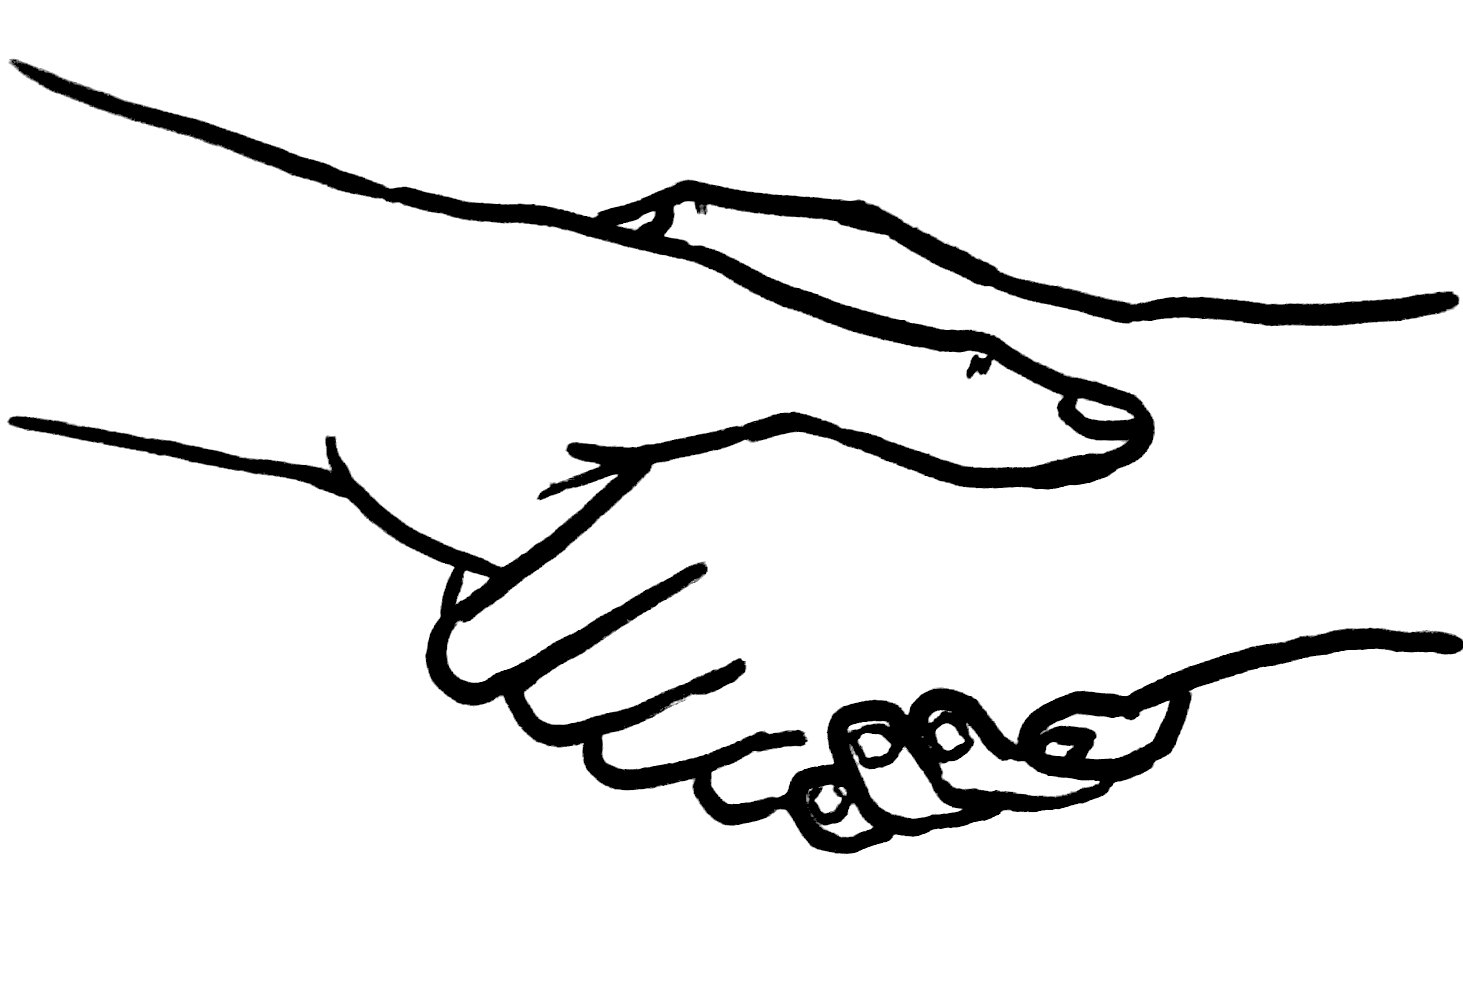 Shaking Hands Clipart